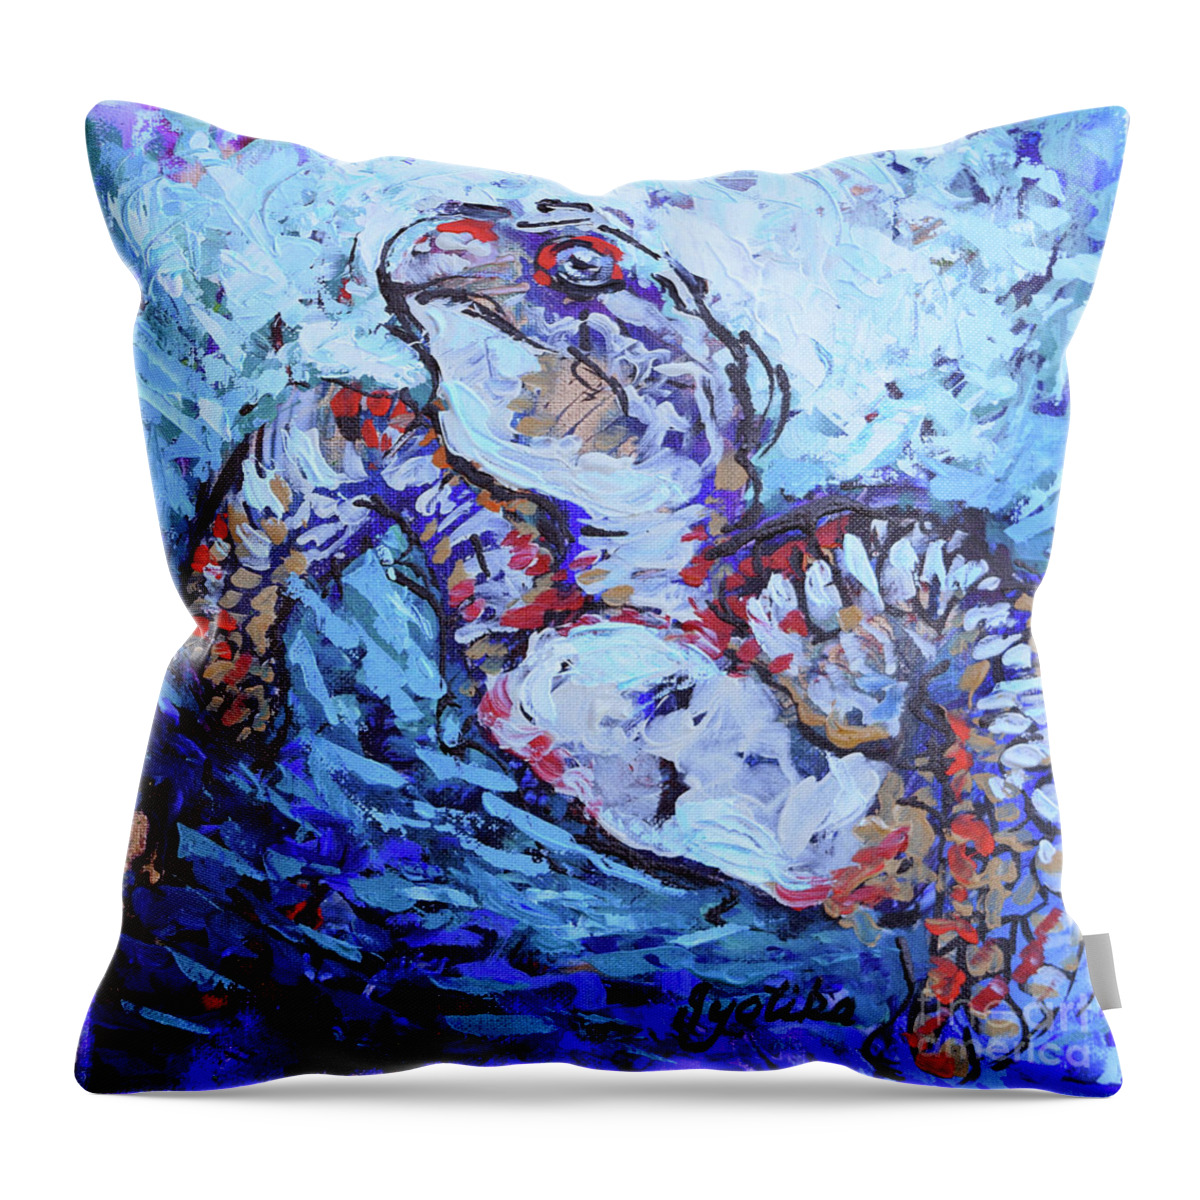  Throw Pillow featuring the painting The Turtle by Jyotika Shroff